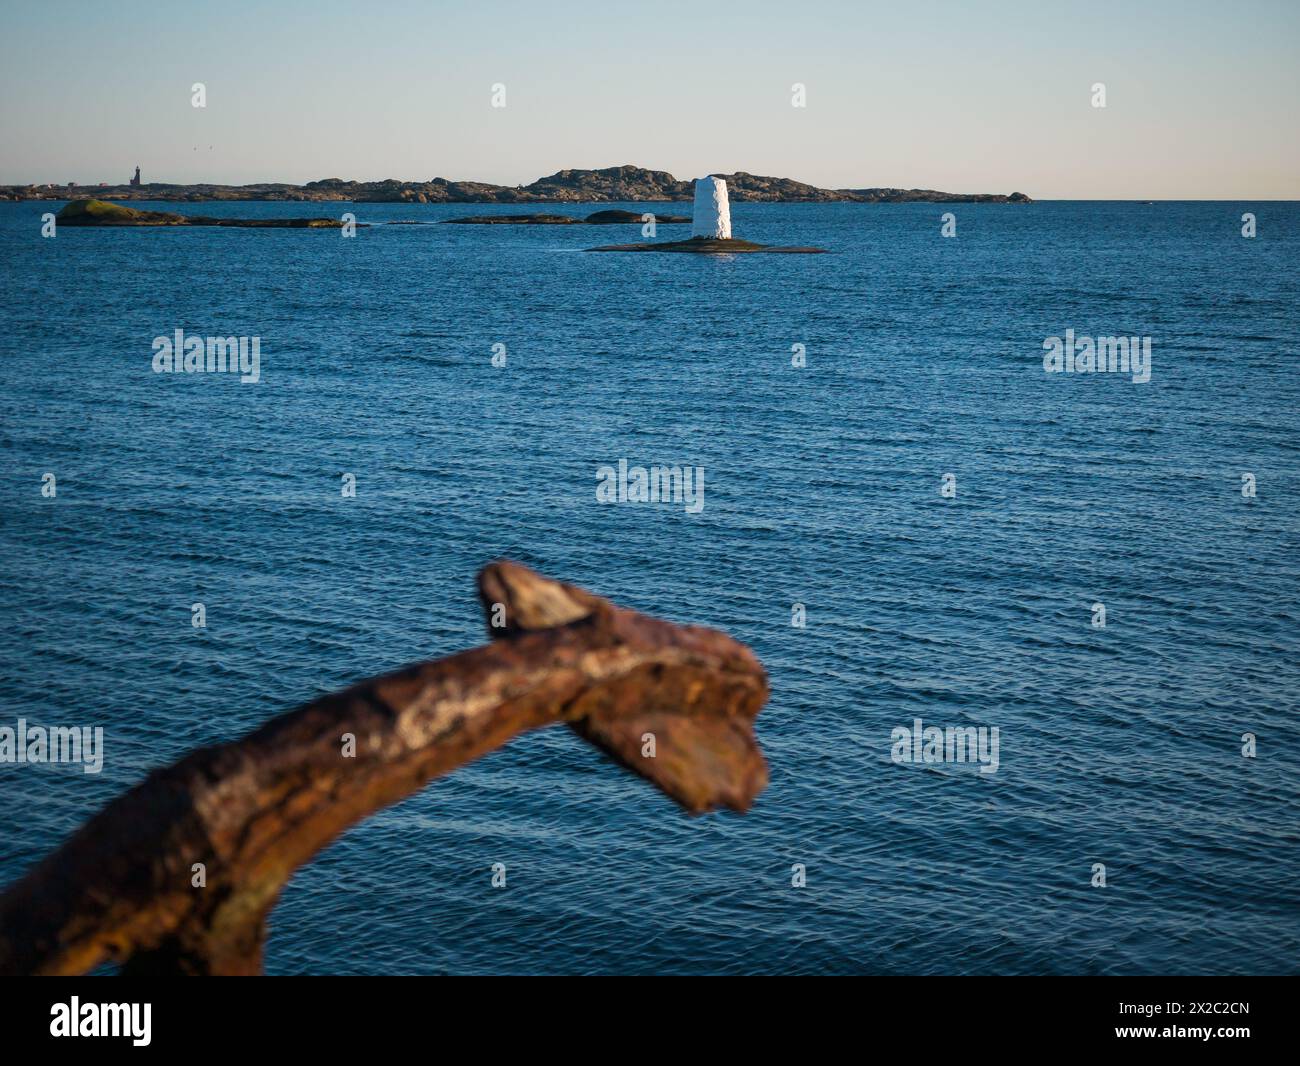 Old and rusty anchor on land overlooking the sea at Klåva, Hönö in the Gothenburg archipelago situated on the west coast of Sweden. Stock Photo